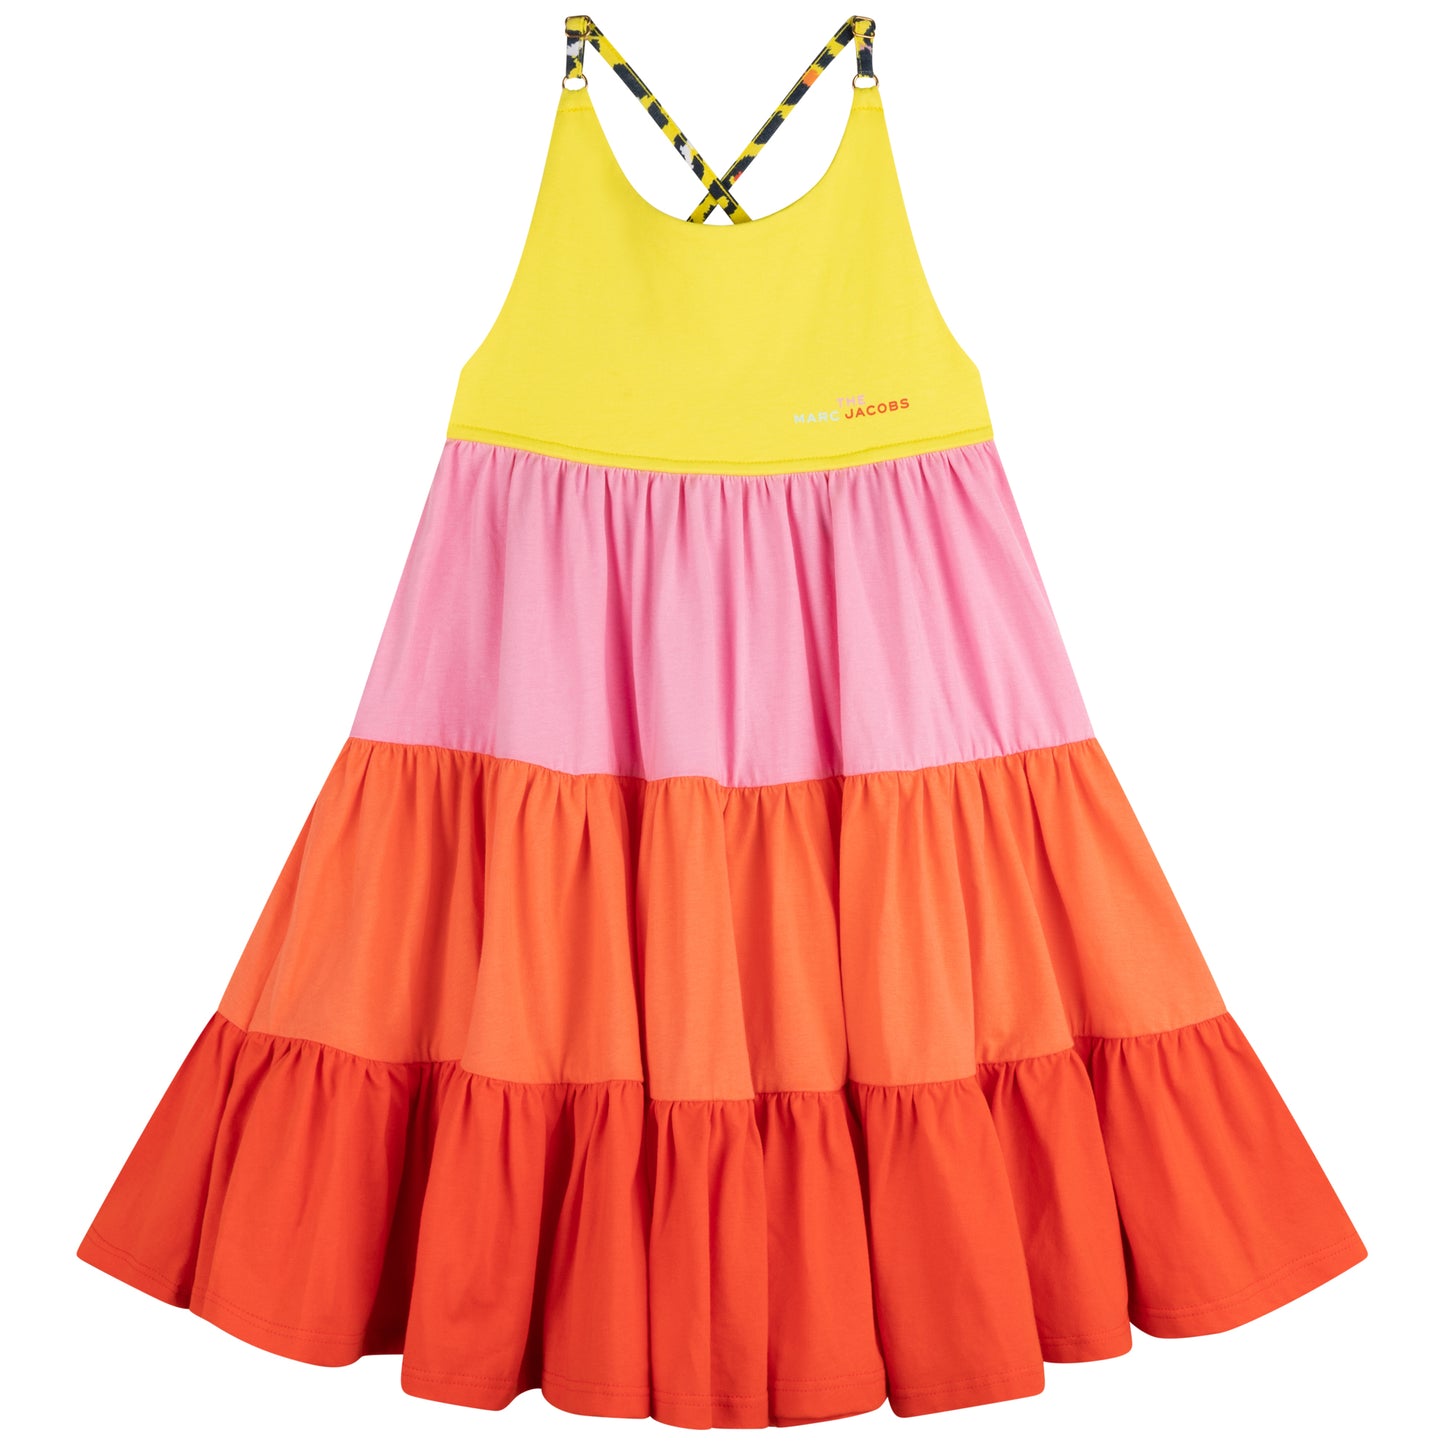 The Marc Jacobs Color Block Sleeveless Dress